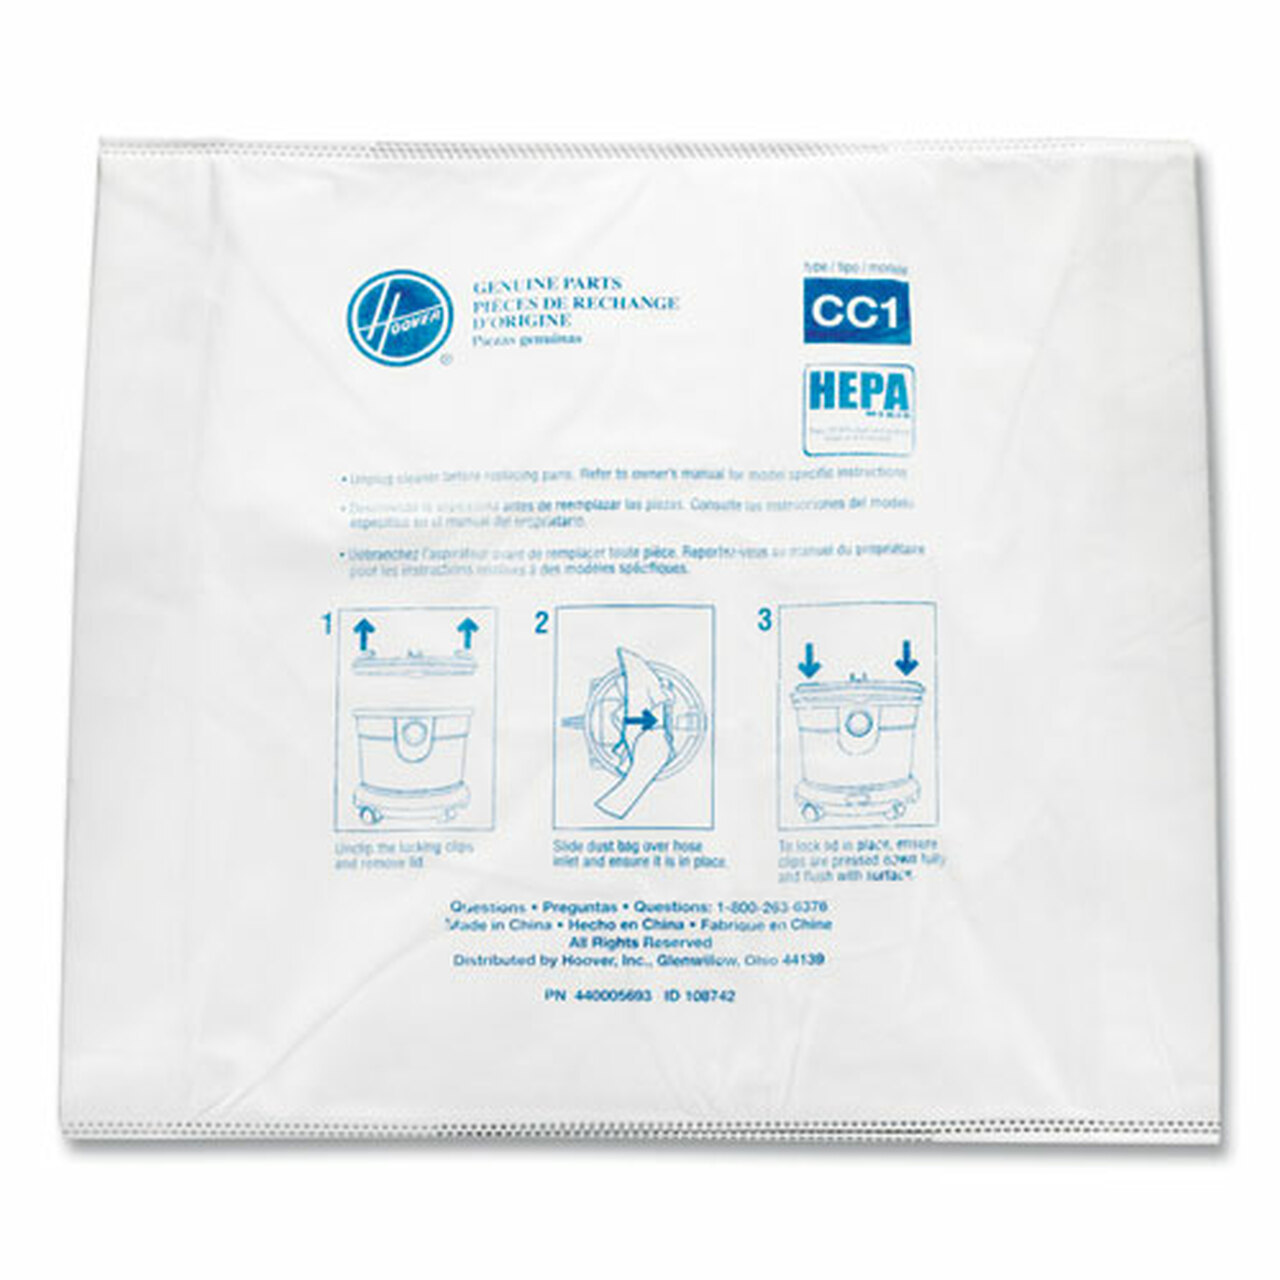 Primary image for Hoover Commercial-1PK Hoover Commercial Disposable Vacuum Bags, Hepa CC1, 10/Pac